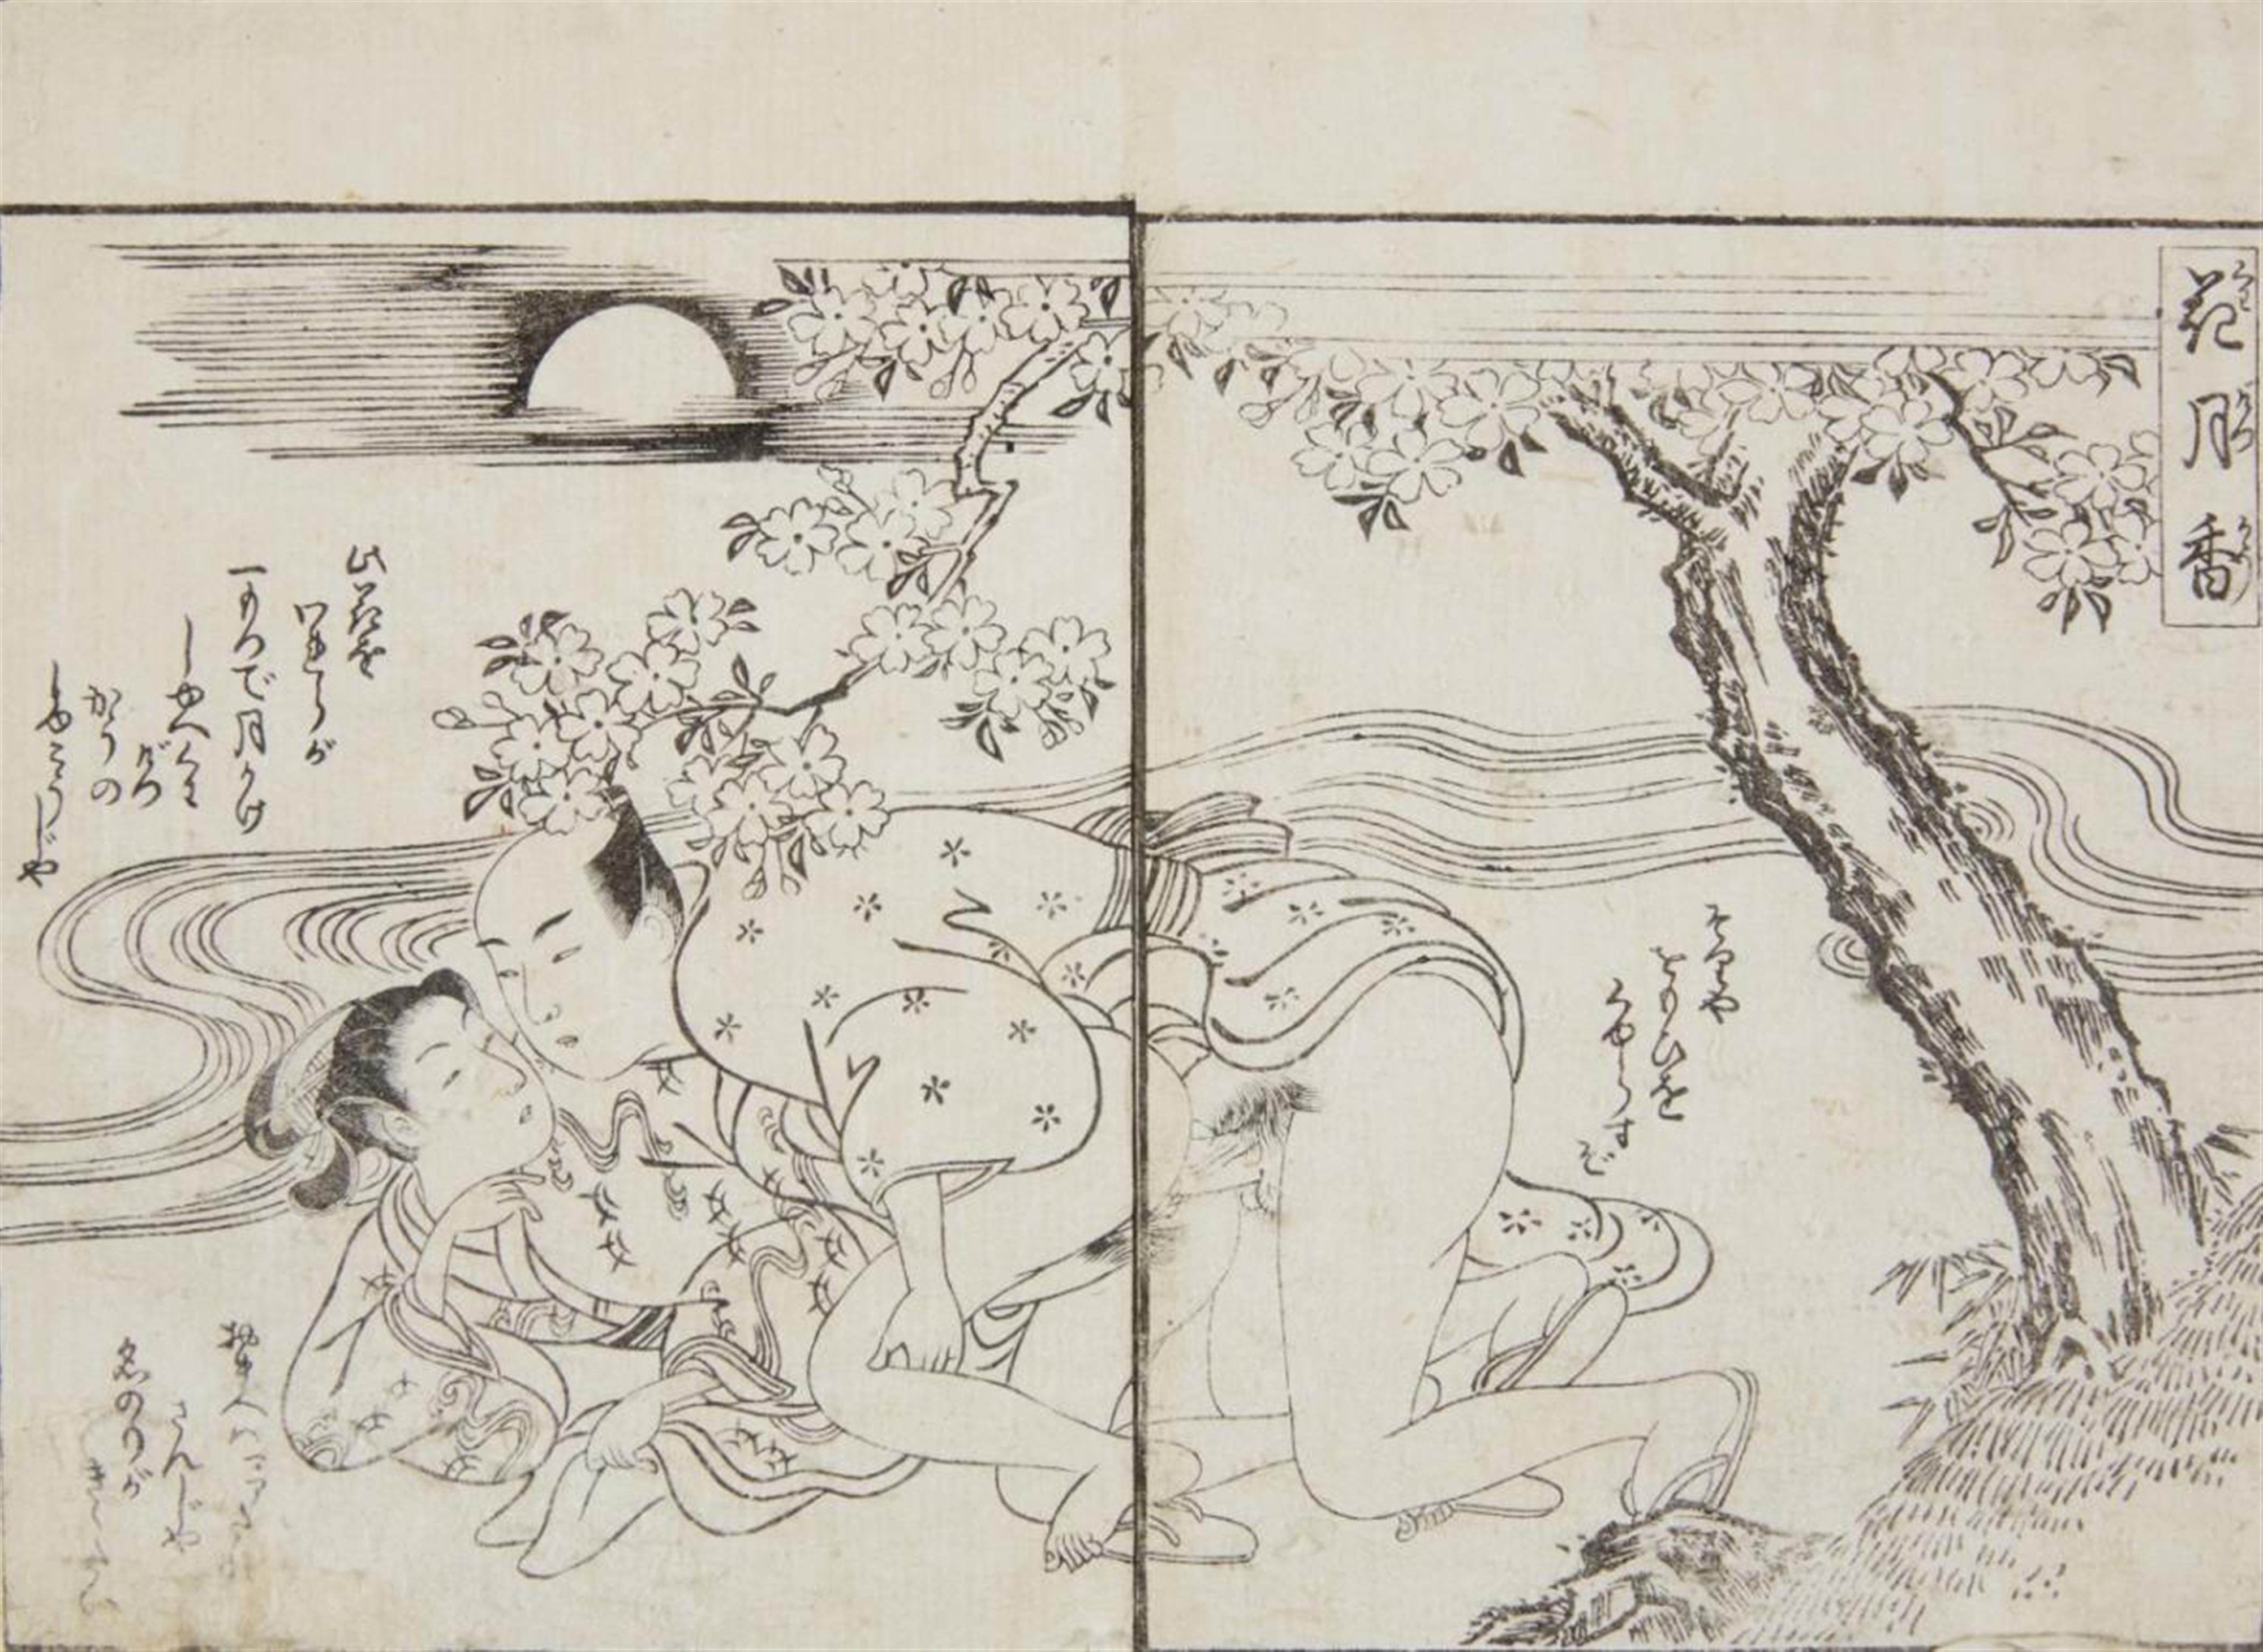 Kitagawa Utamaro
Various Artists of the 18th and 19th centuries - a) Oban, yoko-e. Shunga. Man with a very young woman. Comments. Unsigned. b) Four double page illustrations from various erotic albums. Unsigned. (5) - image-2